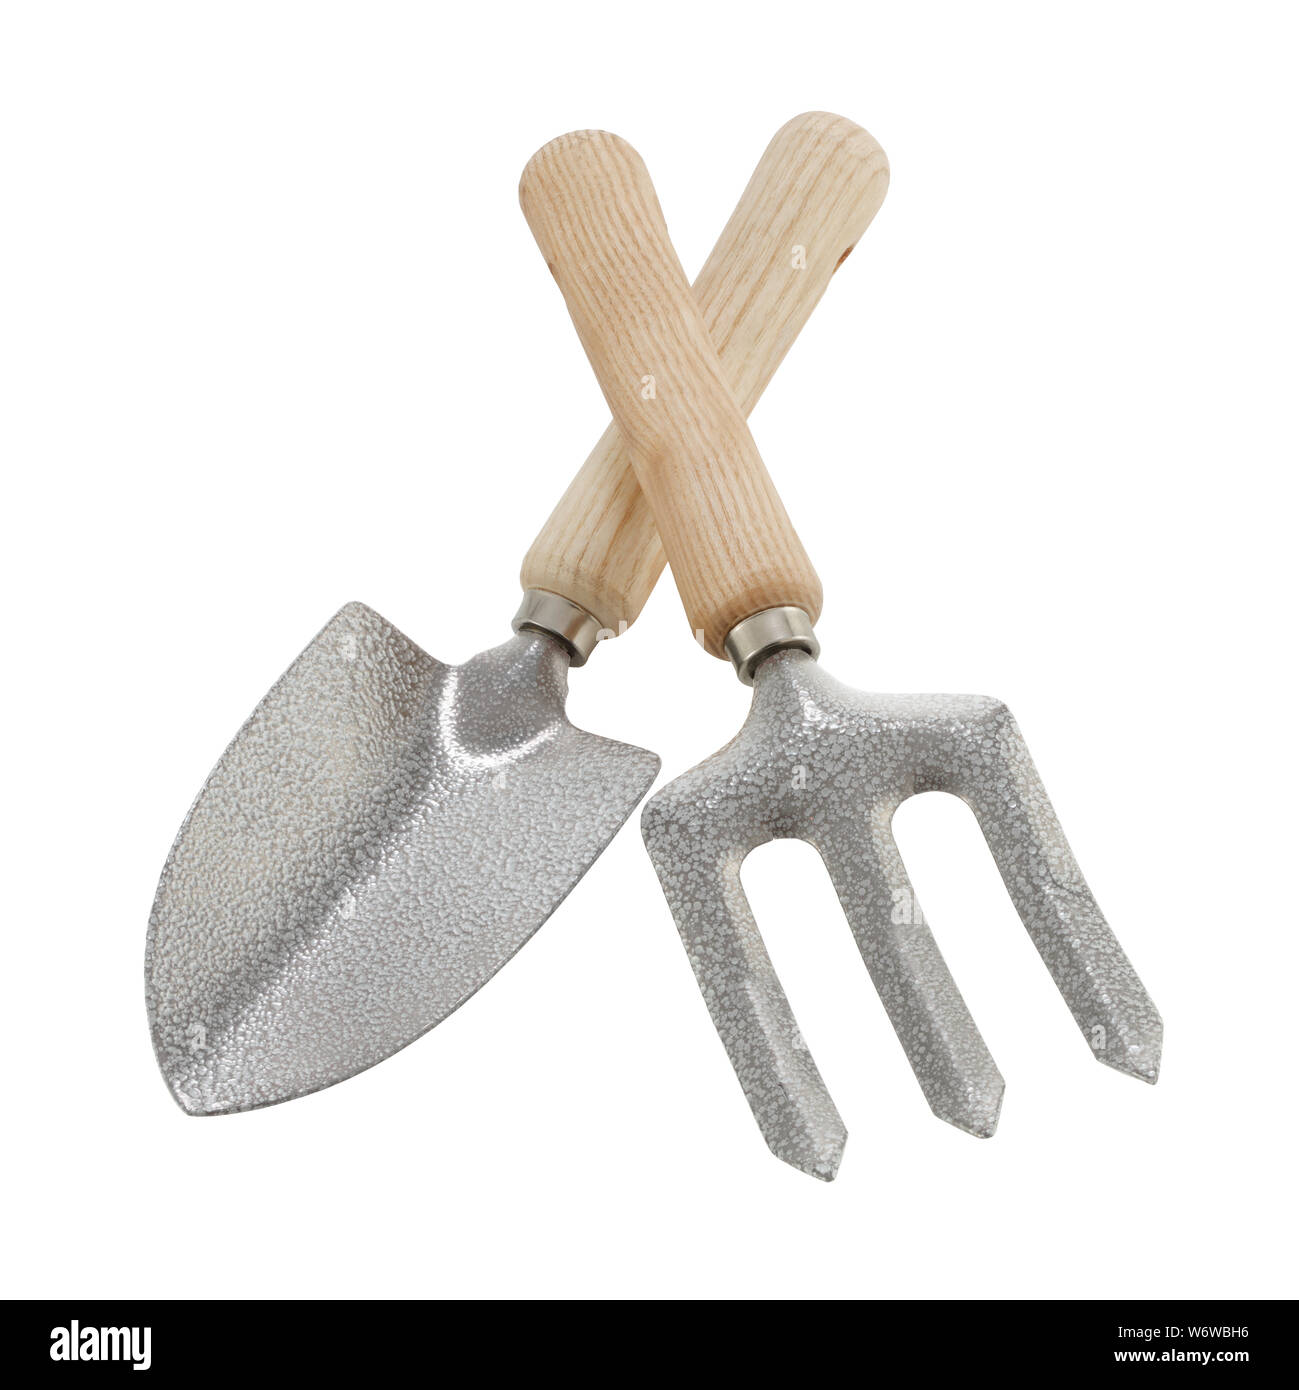 A garden trowel and hand fork set isolated on white with clipping path Stock Photo